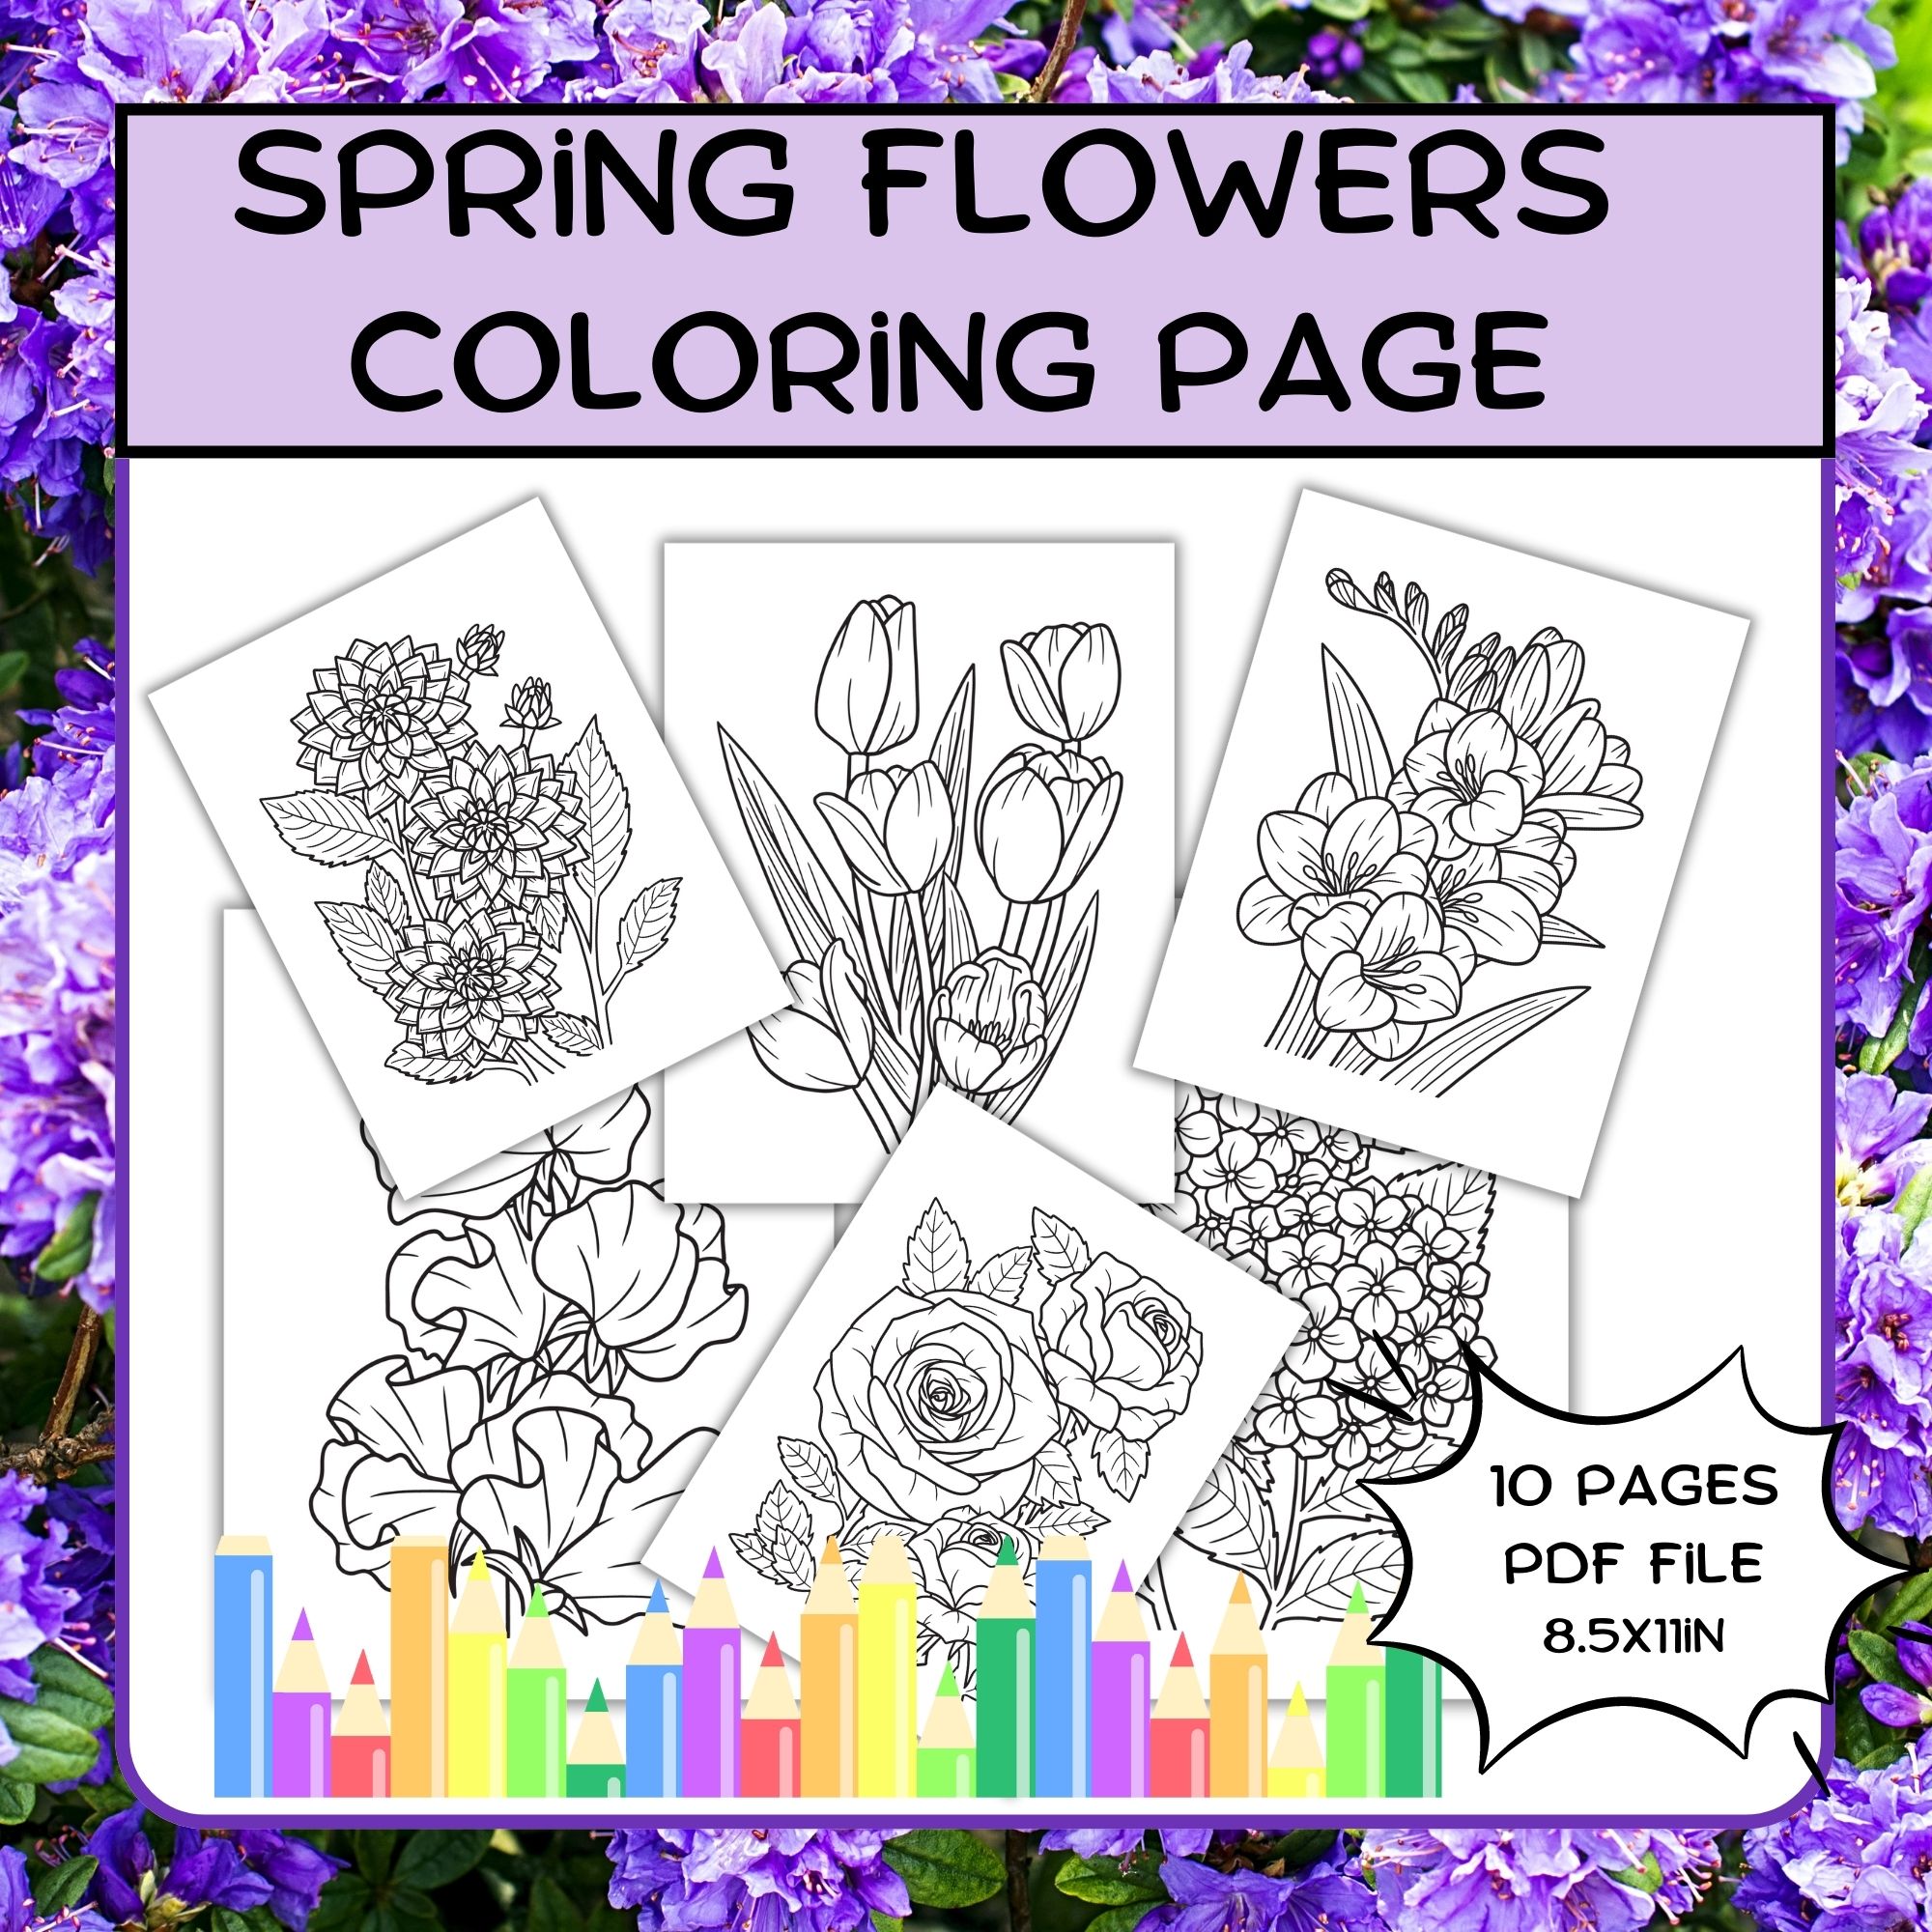 Spring flowers coloring sheets cloring page spring flowers made by teachers